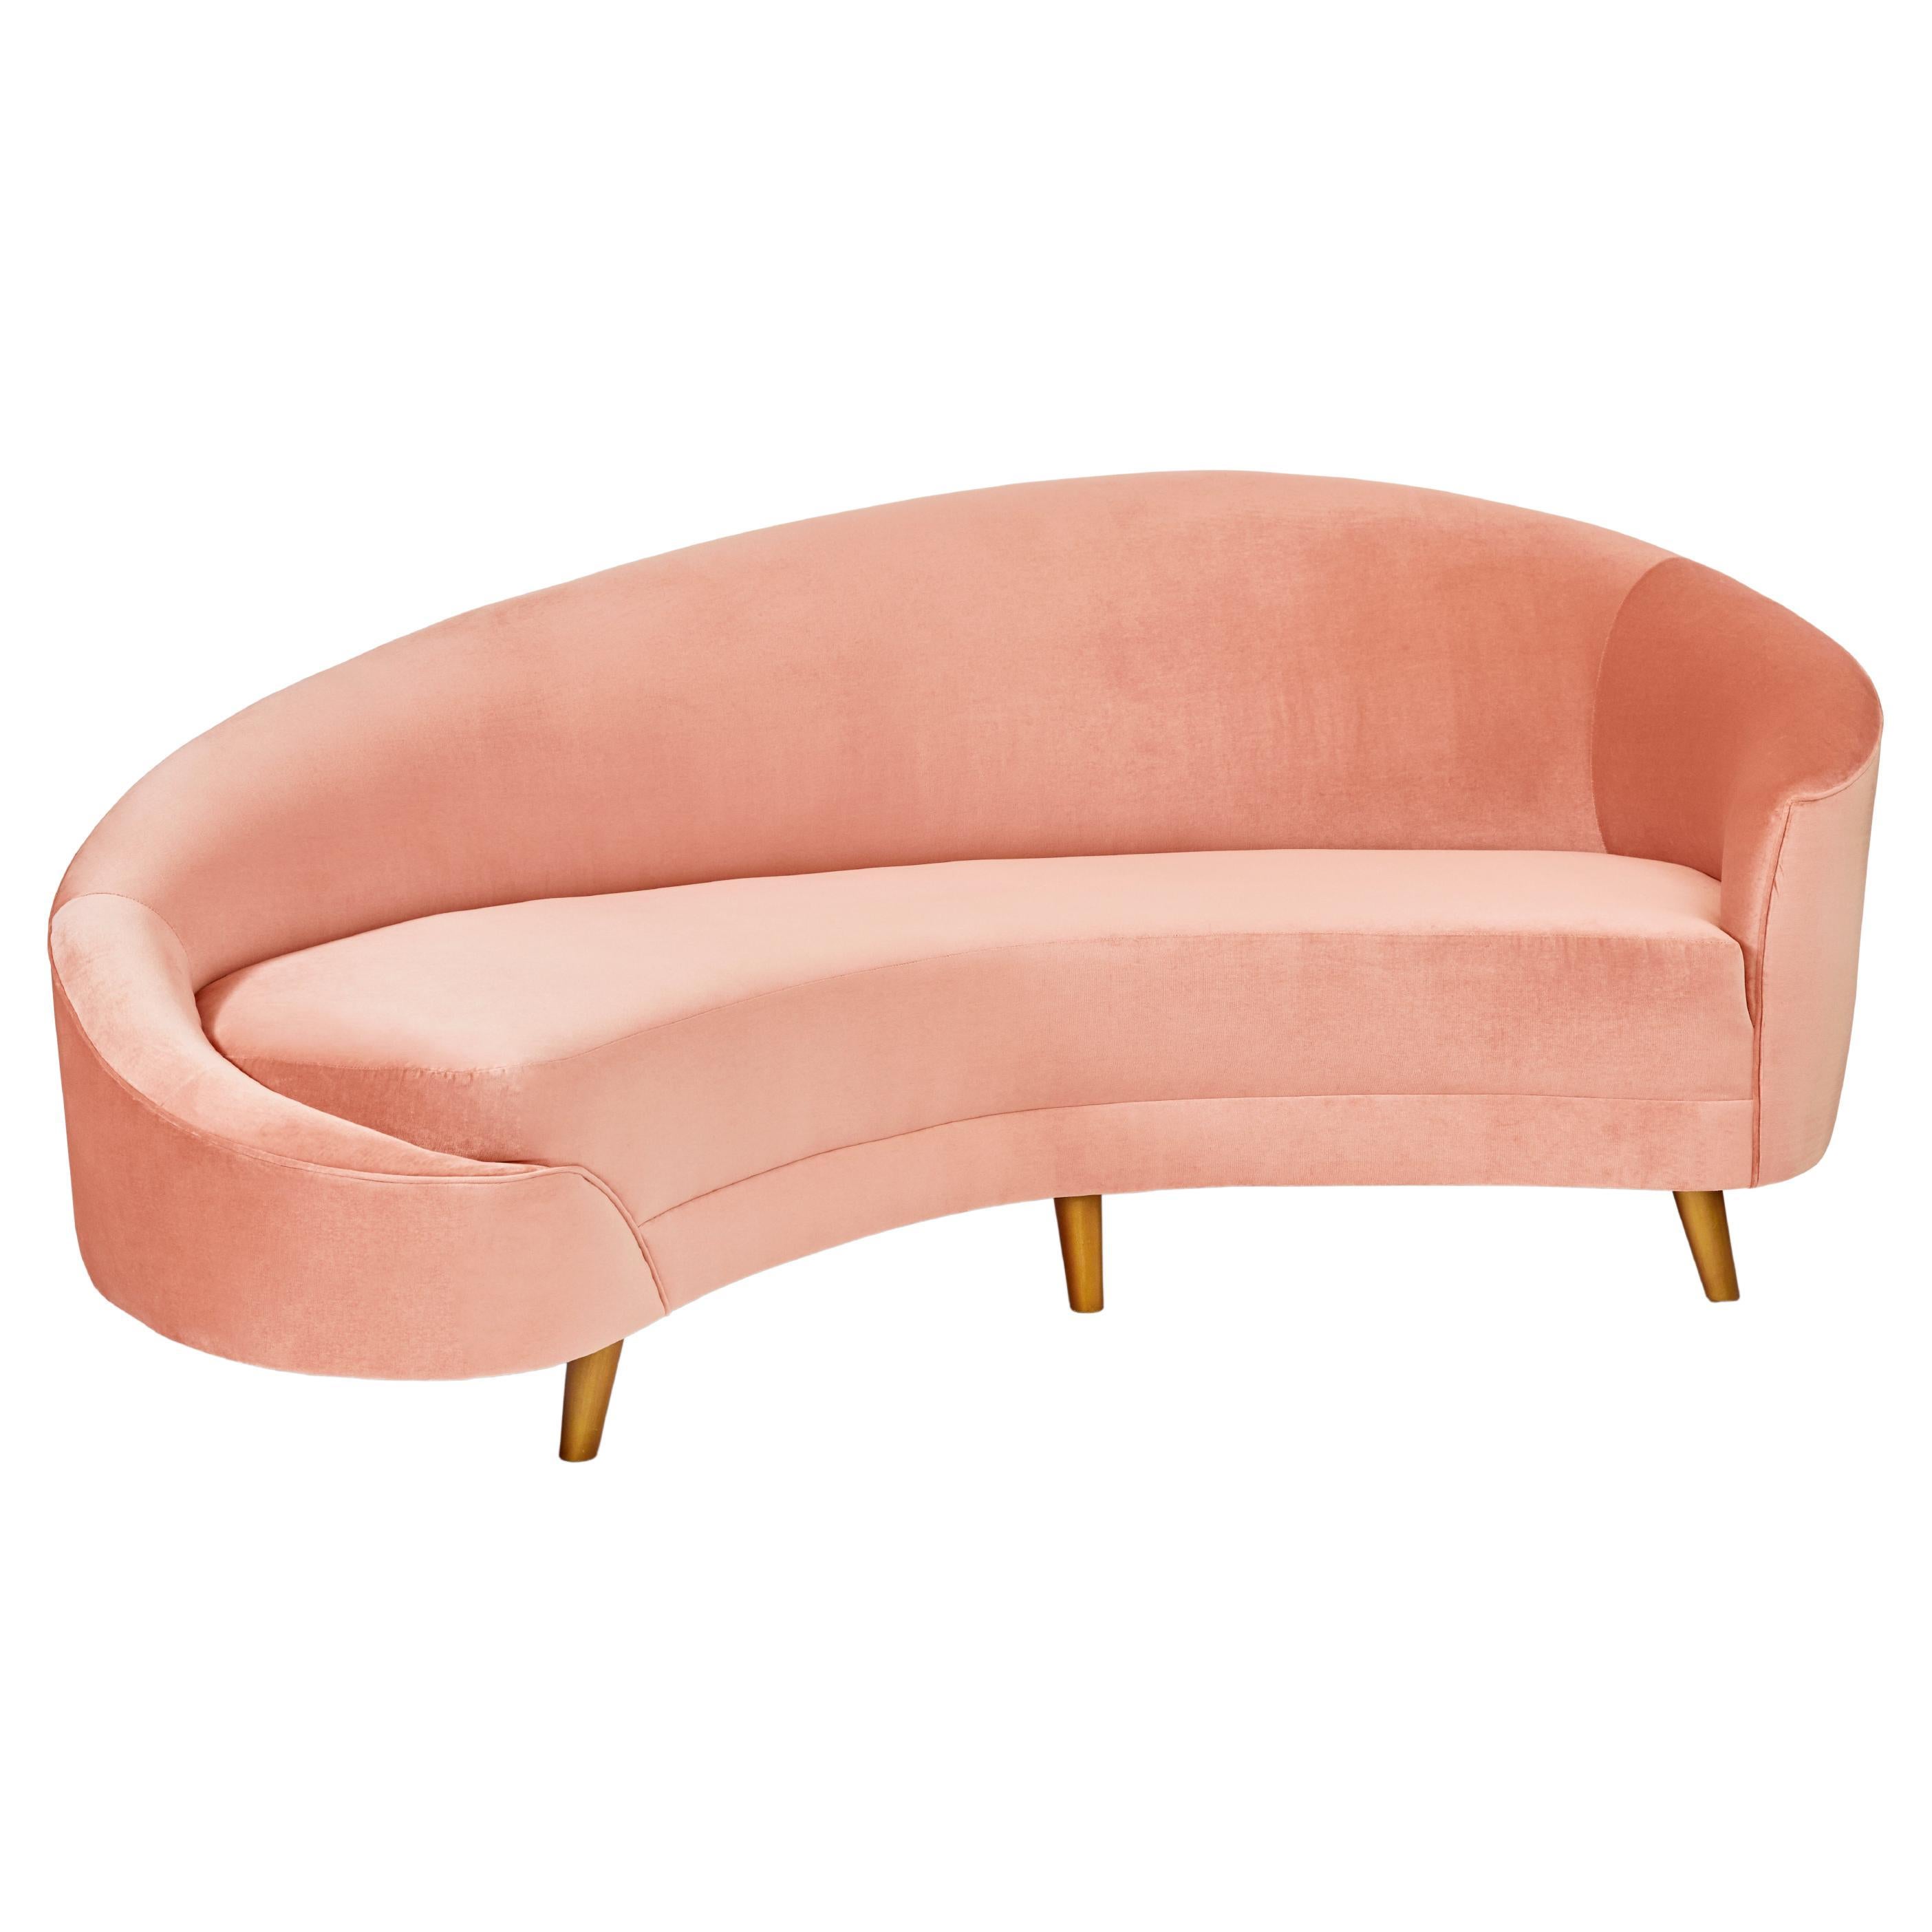 Contemporary Melodia Curved Sofa Handcrafted by James by Jimmy Delaurentis  For Sale at 1stDibs